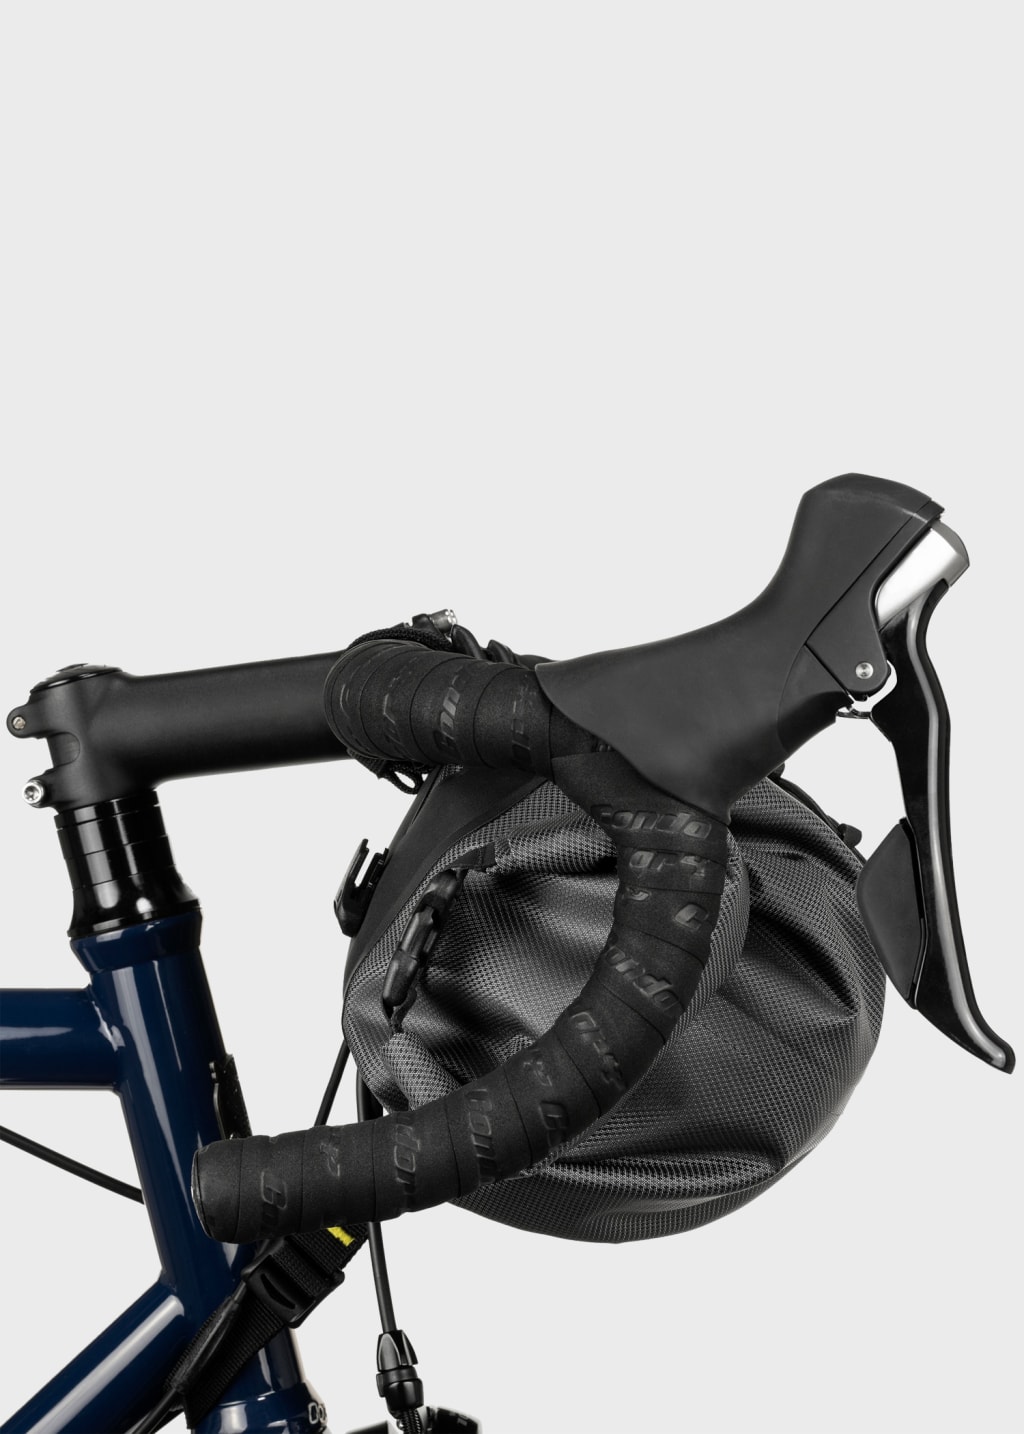 Detail View - 'Expedition' Handlebar Pack Cycling Bag by Apidura Paul Smith